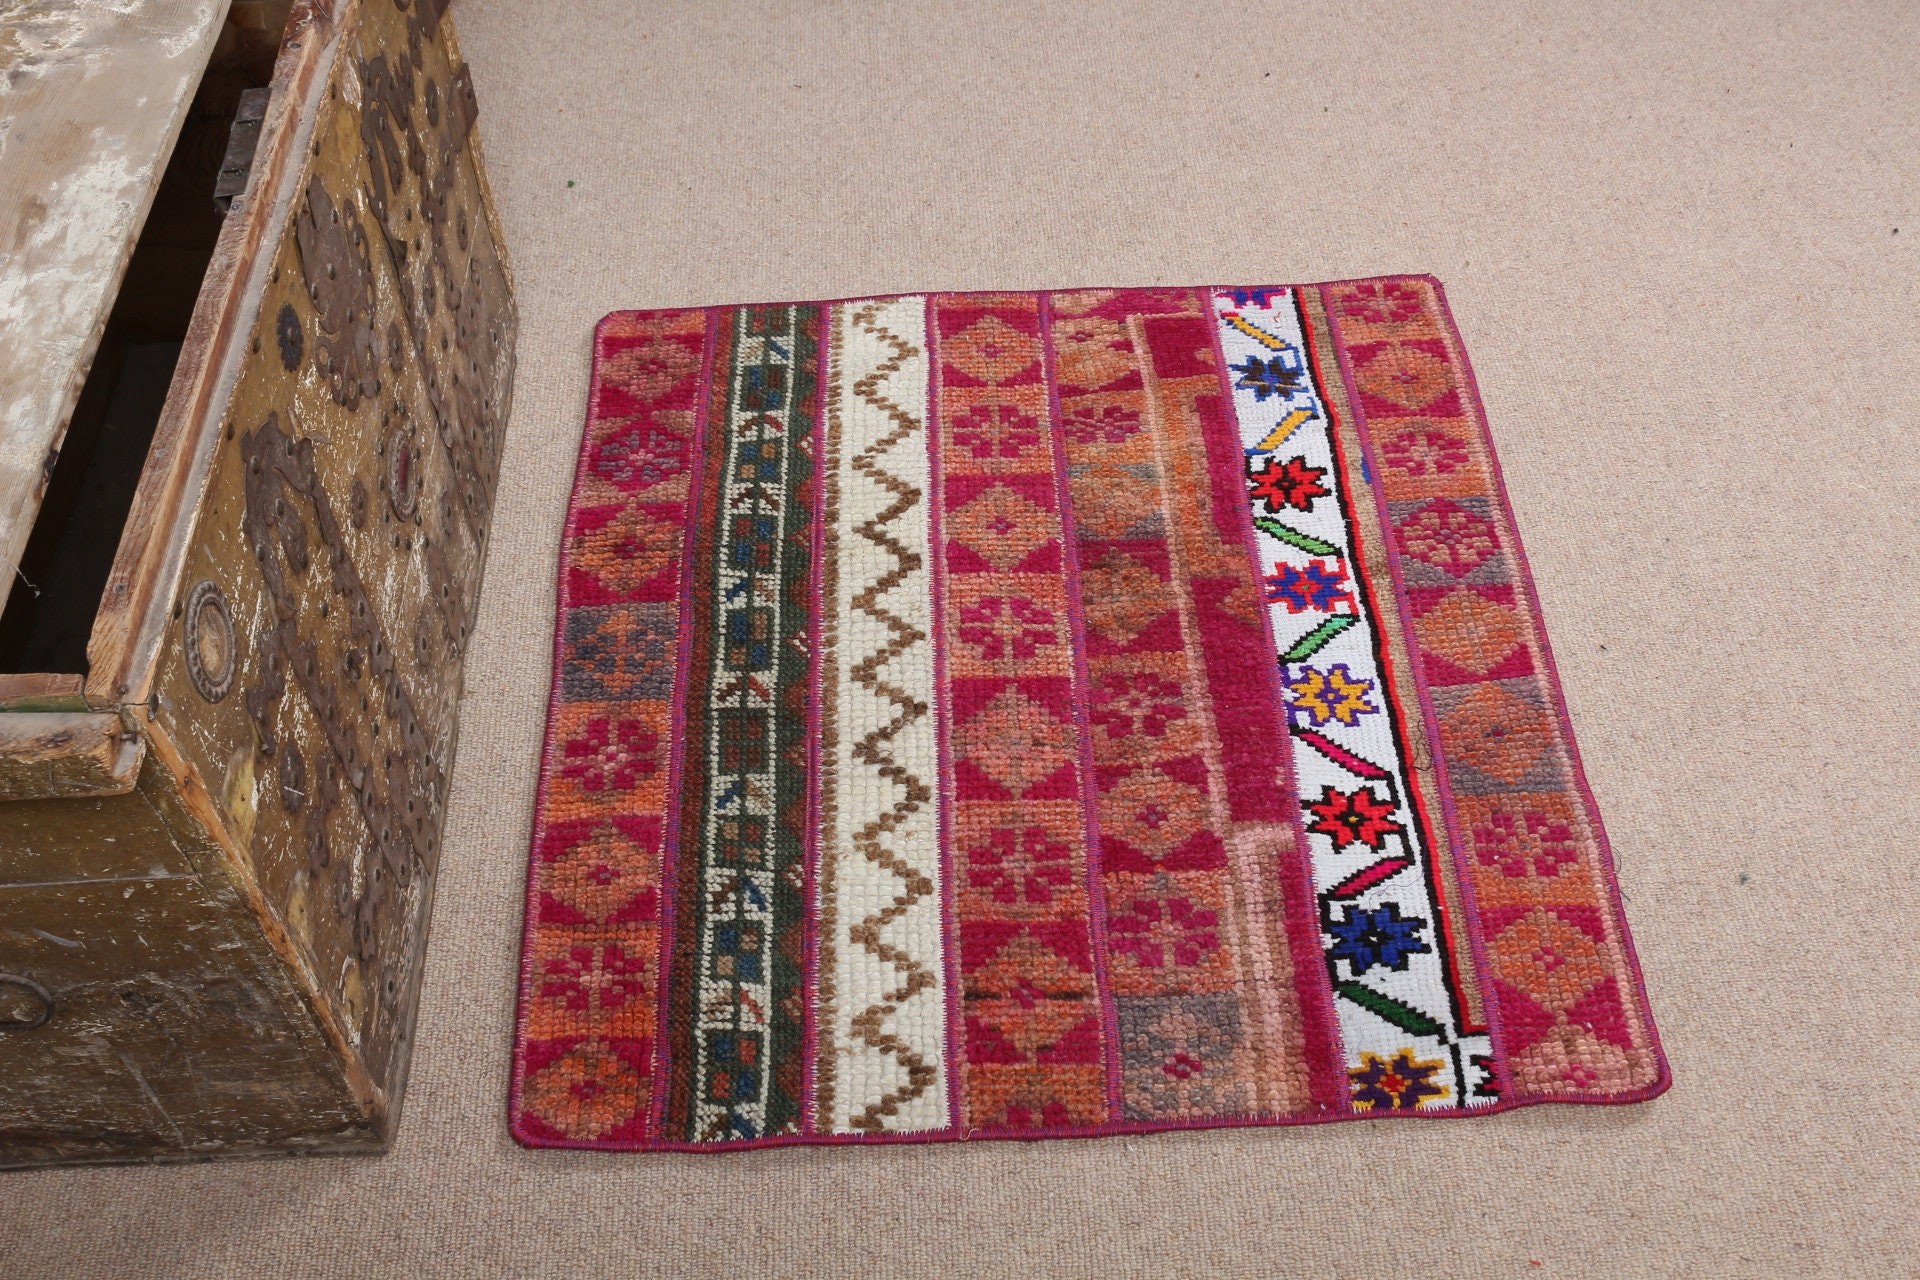 Vintage Rugs, 2.5x2.6 ft Small Rugs, Bedroom Rug, Turkish Rug, Pink Antique Rugs, Car Mat Rug, Rugs for Bath, Oushak Rug